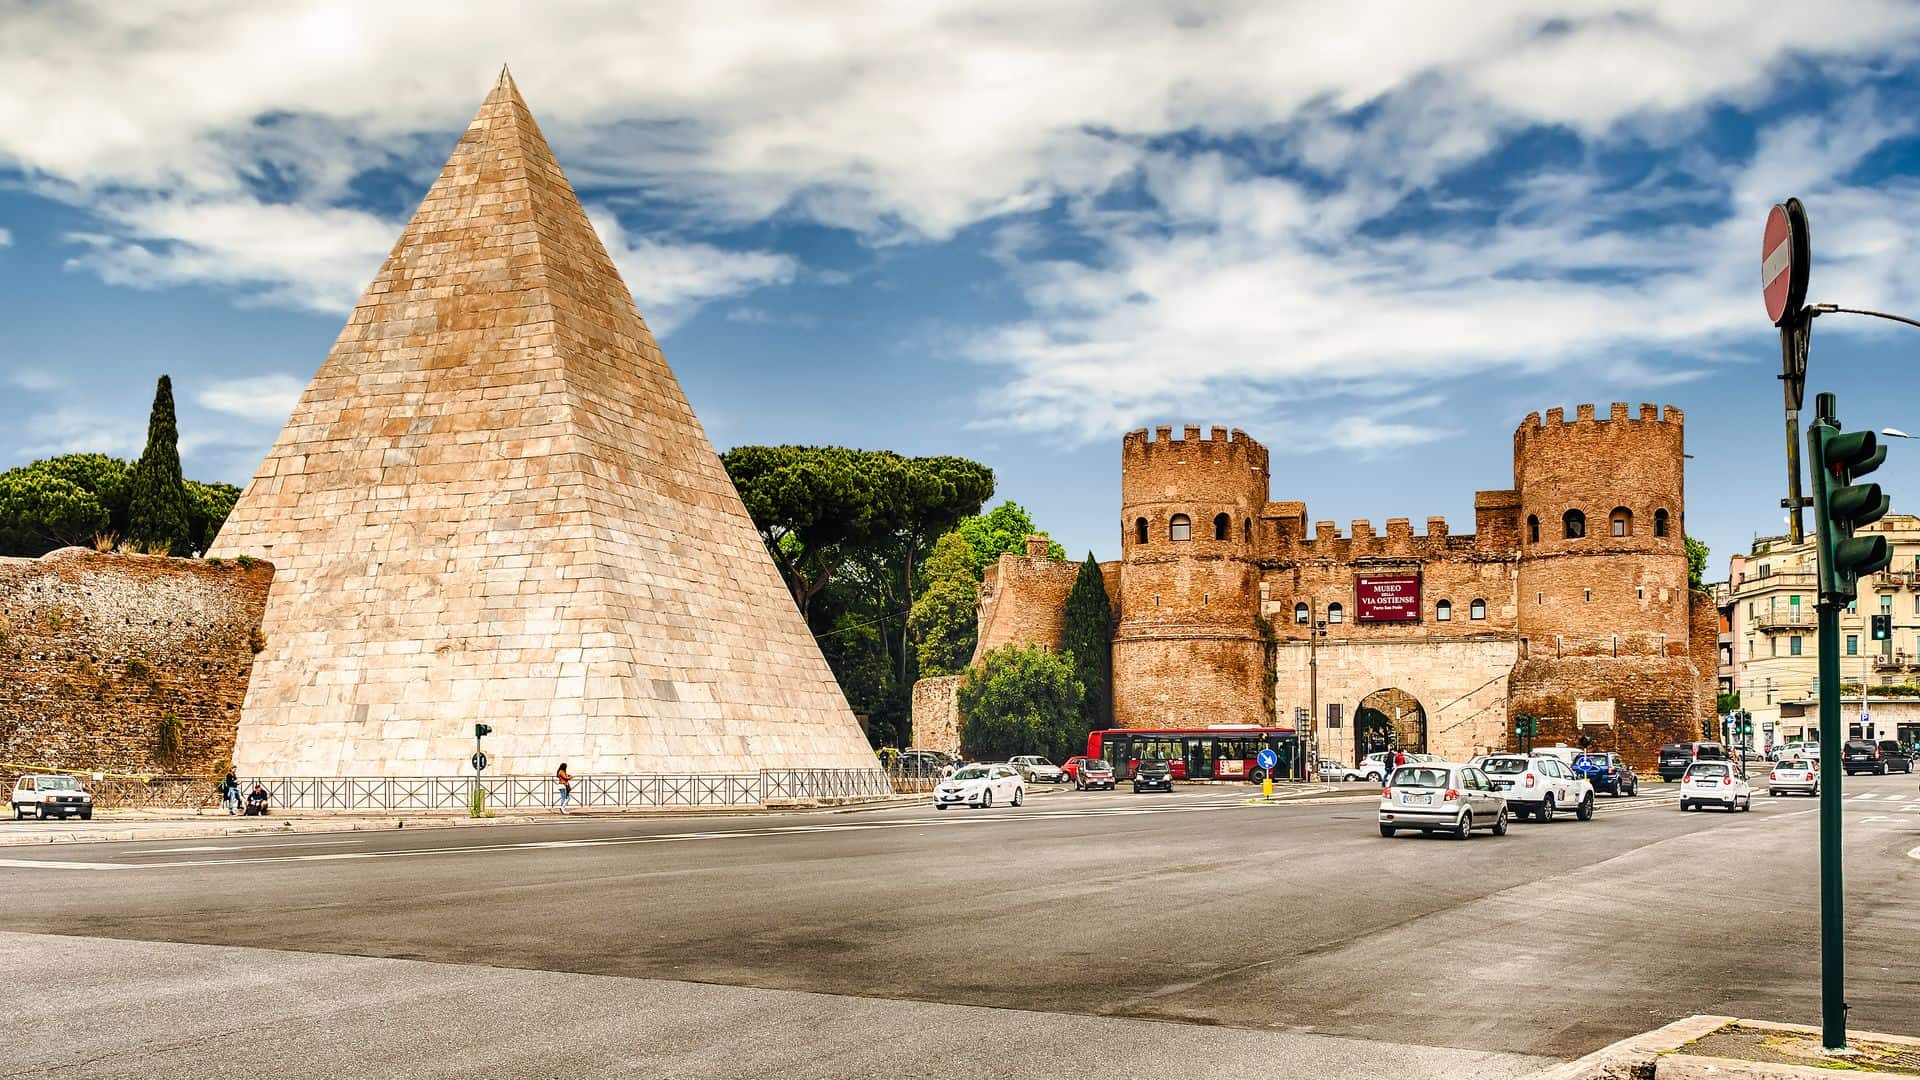 Street view of the Pyramid of Cestius and the Porta San Paolo.